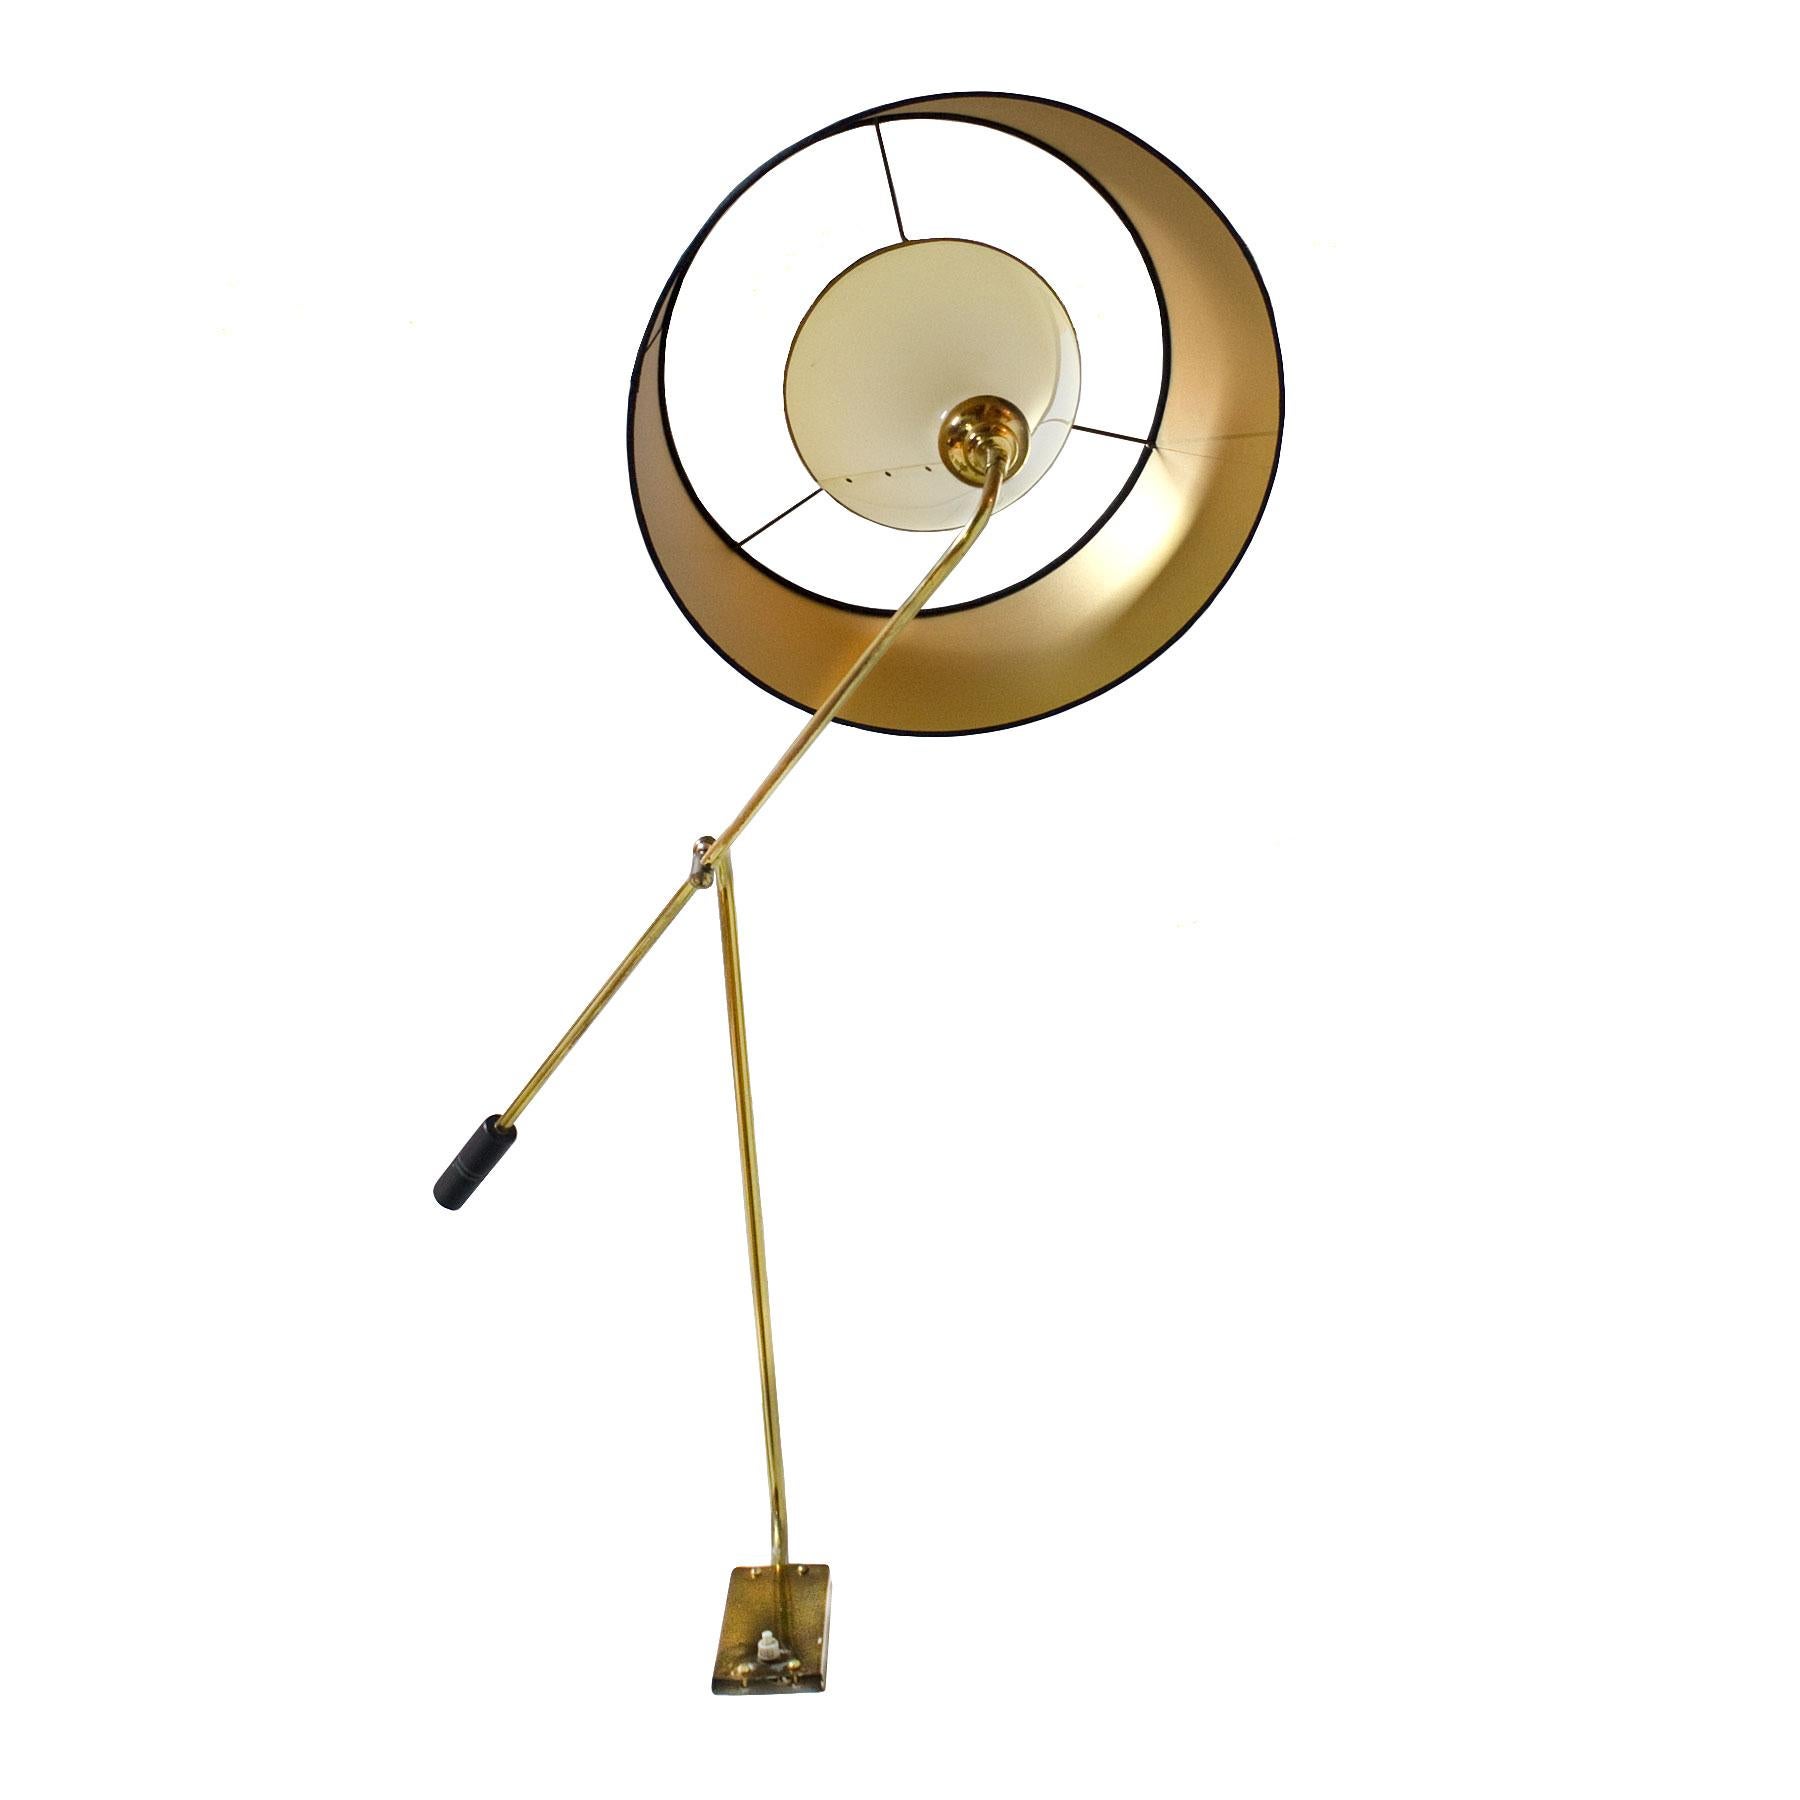 Big Mid-Century Modern Wall Light by Maison Lunel, Brass, Steel, Perspex -France In Good Condition For Sale In Girona, ES